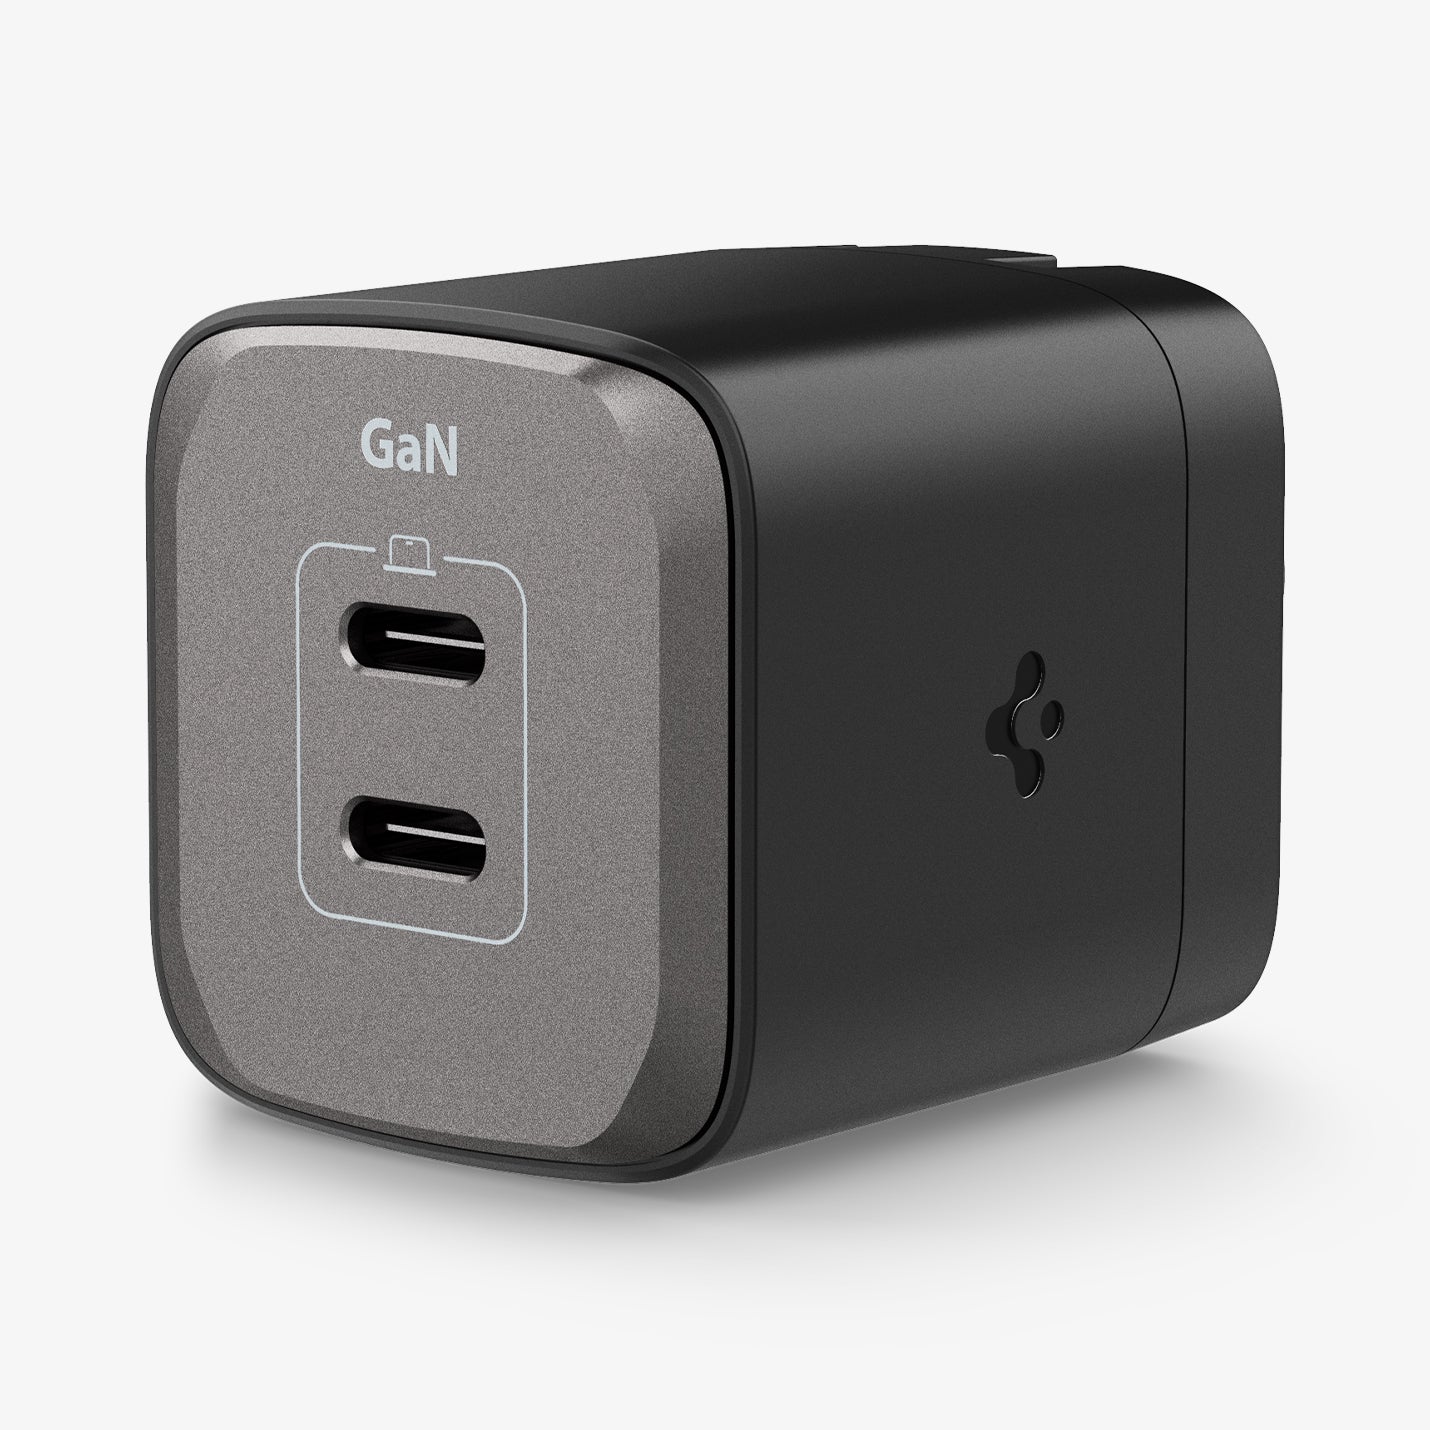 ACH05151 - ArcStation™ Pro GaN 452 Dual USB-C Wall Charger PE2203 in Midnight Black showing the sides and top with 2 usb c type charging ports